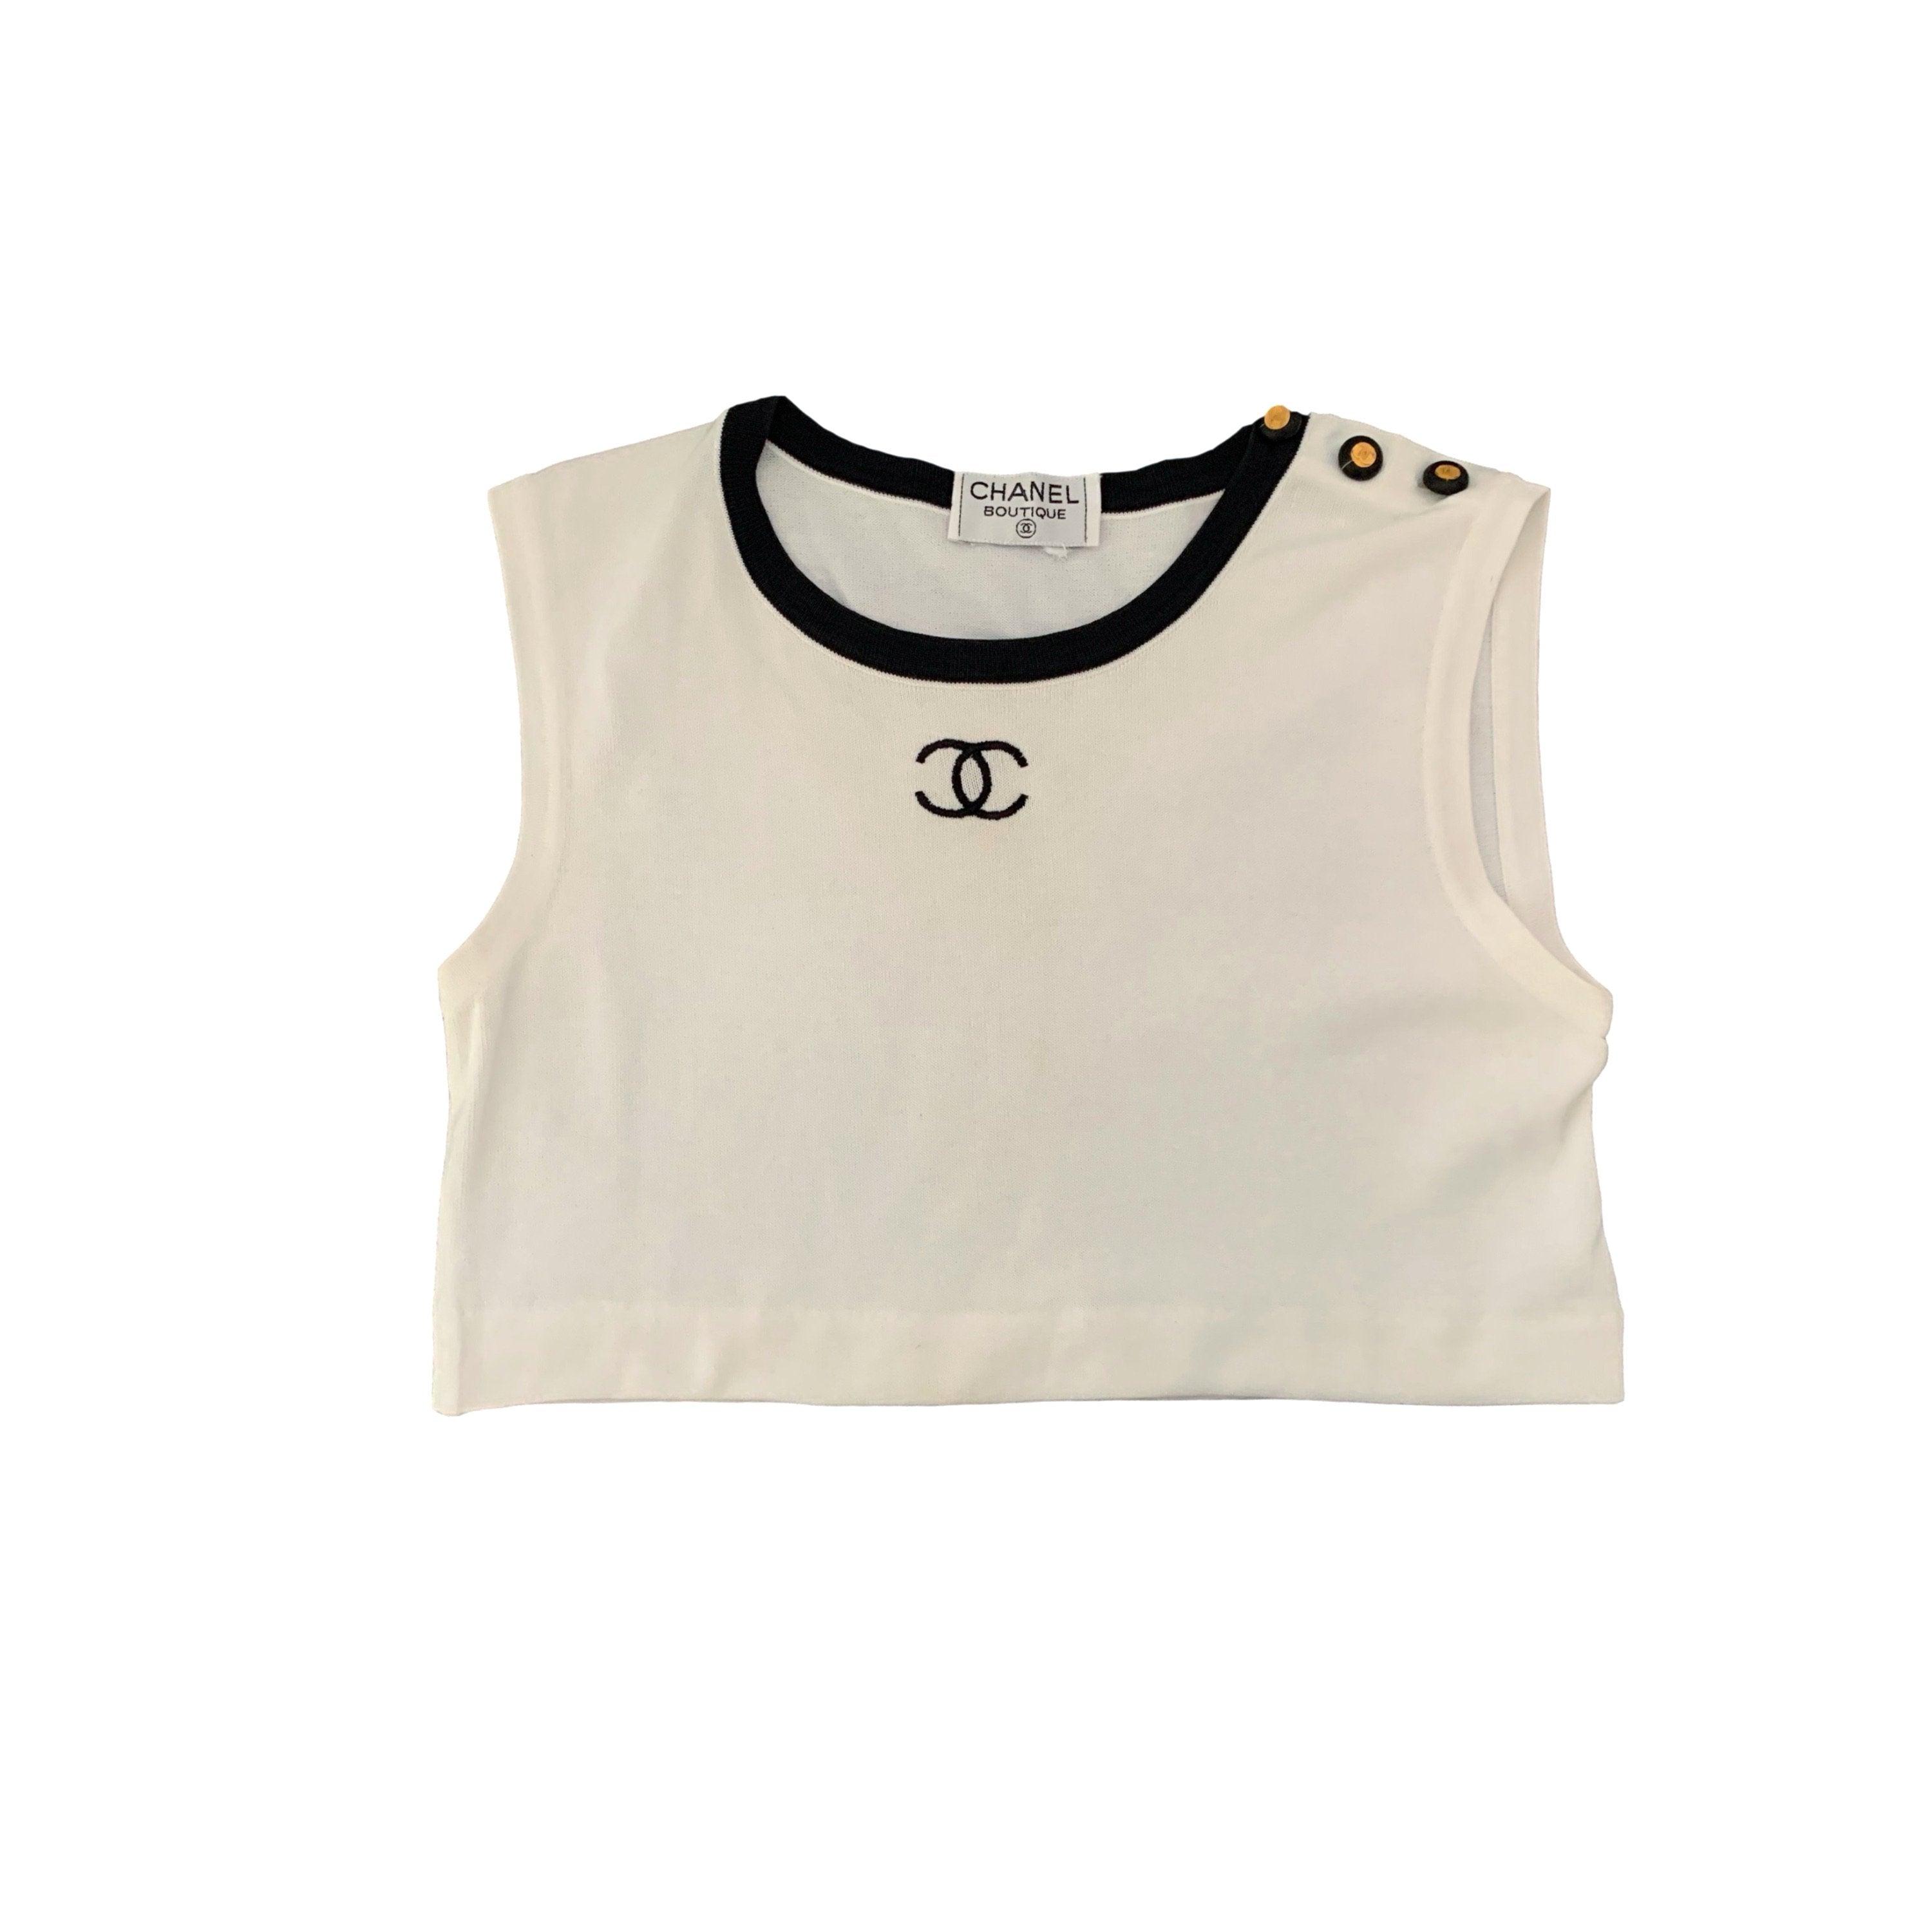 chanel black and white crop top small